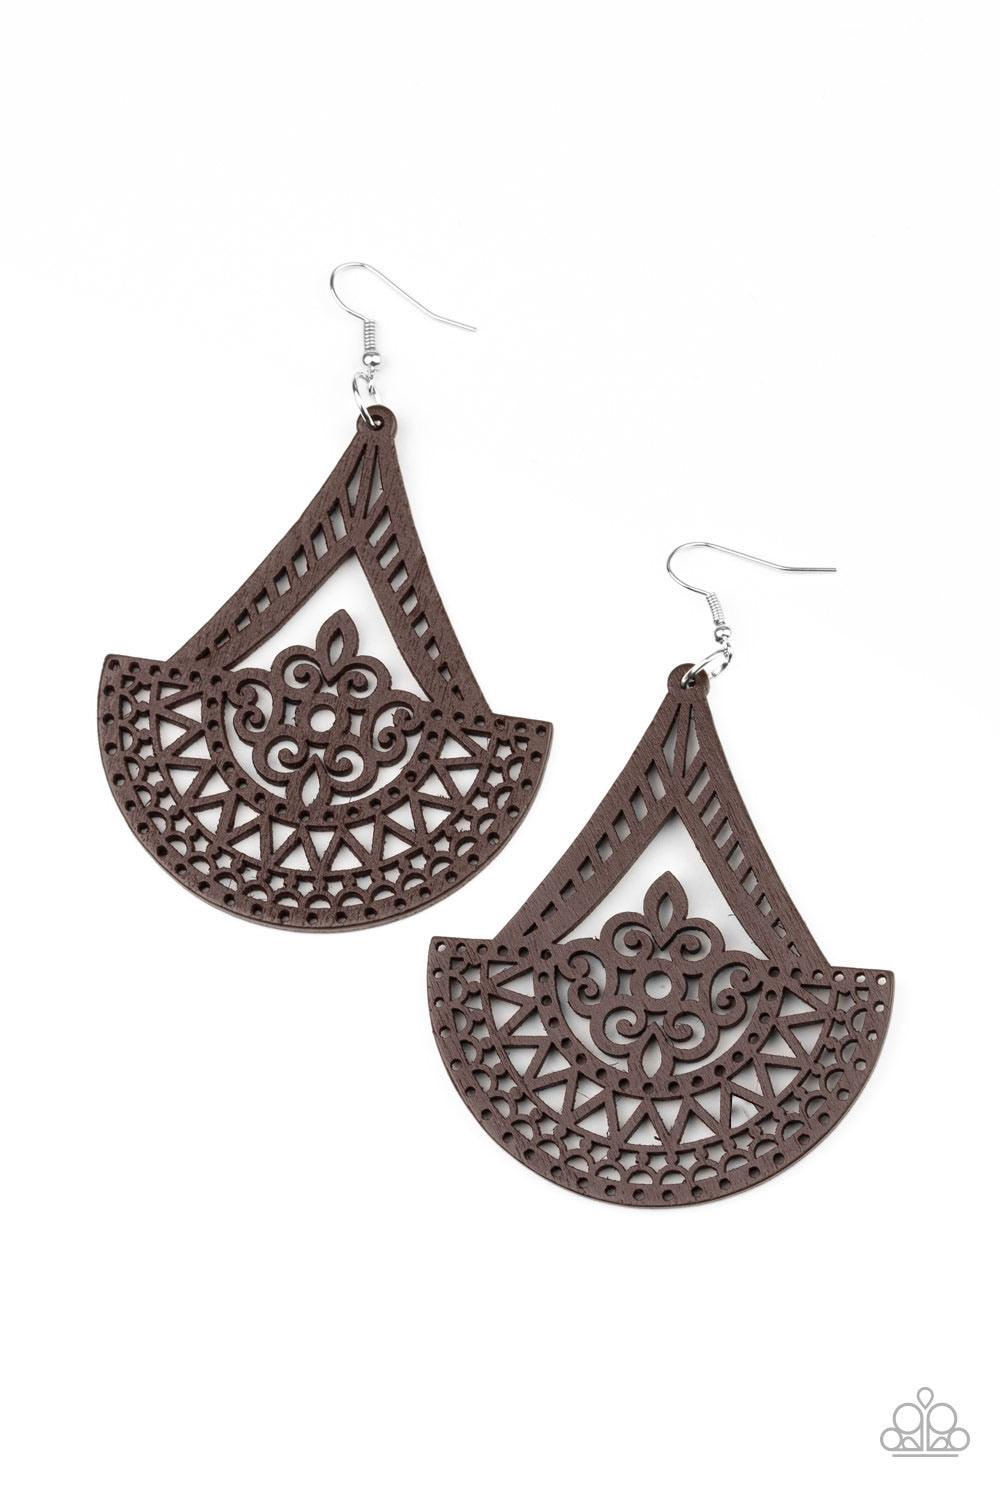 Paparazzi Accessories Tiki Sunrise - Brown Stenciled in an airy wooden filigree pattern, a decorative frame swings from the ear for a seasonal look. Earring attaches to a standard fishhook fitting. Jewelry